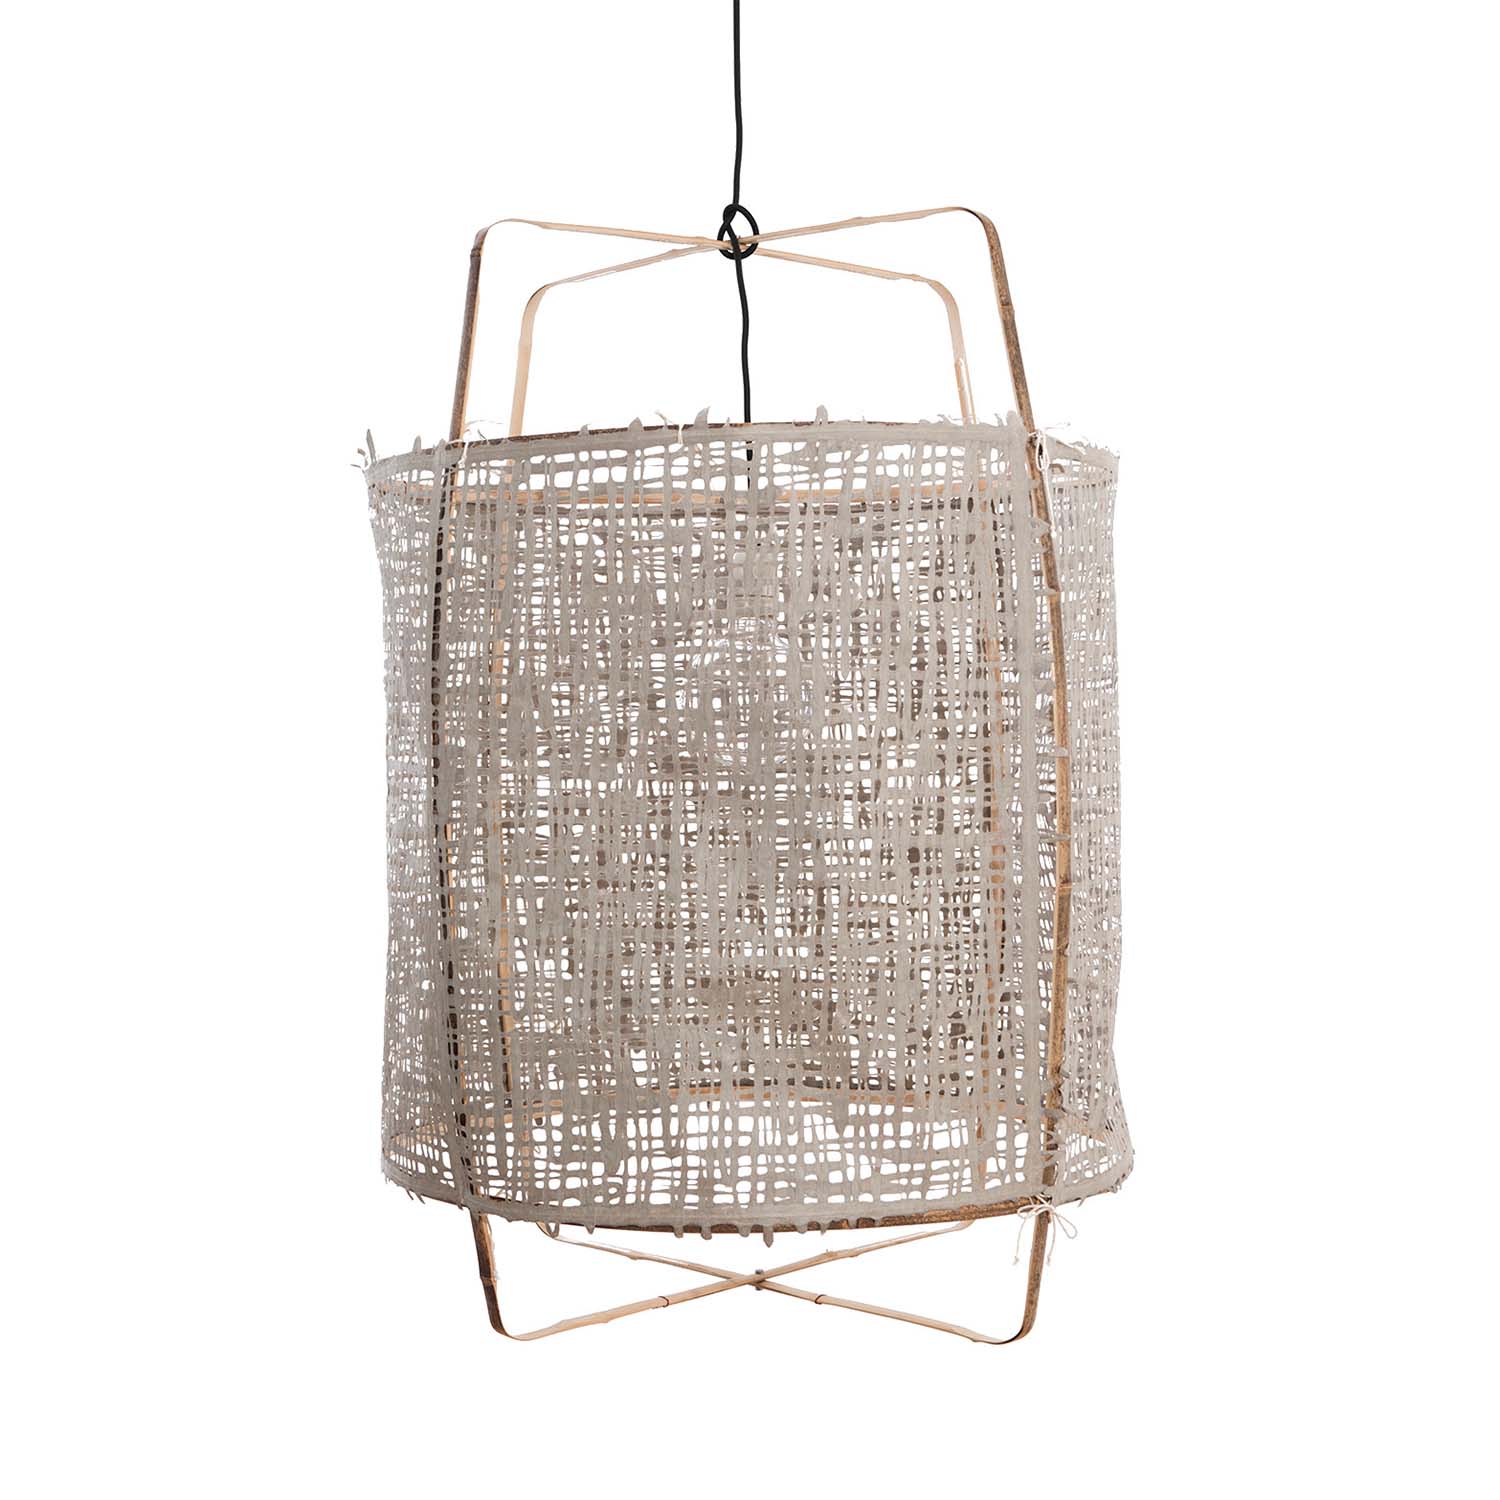 Z1 - Cage pendant lamp in bamboo and white, beige, gray or black fabric